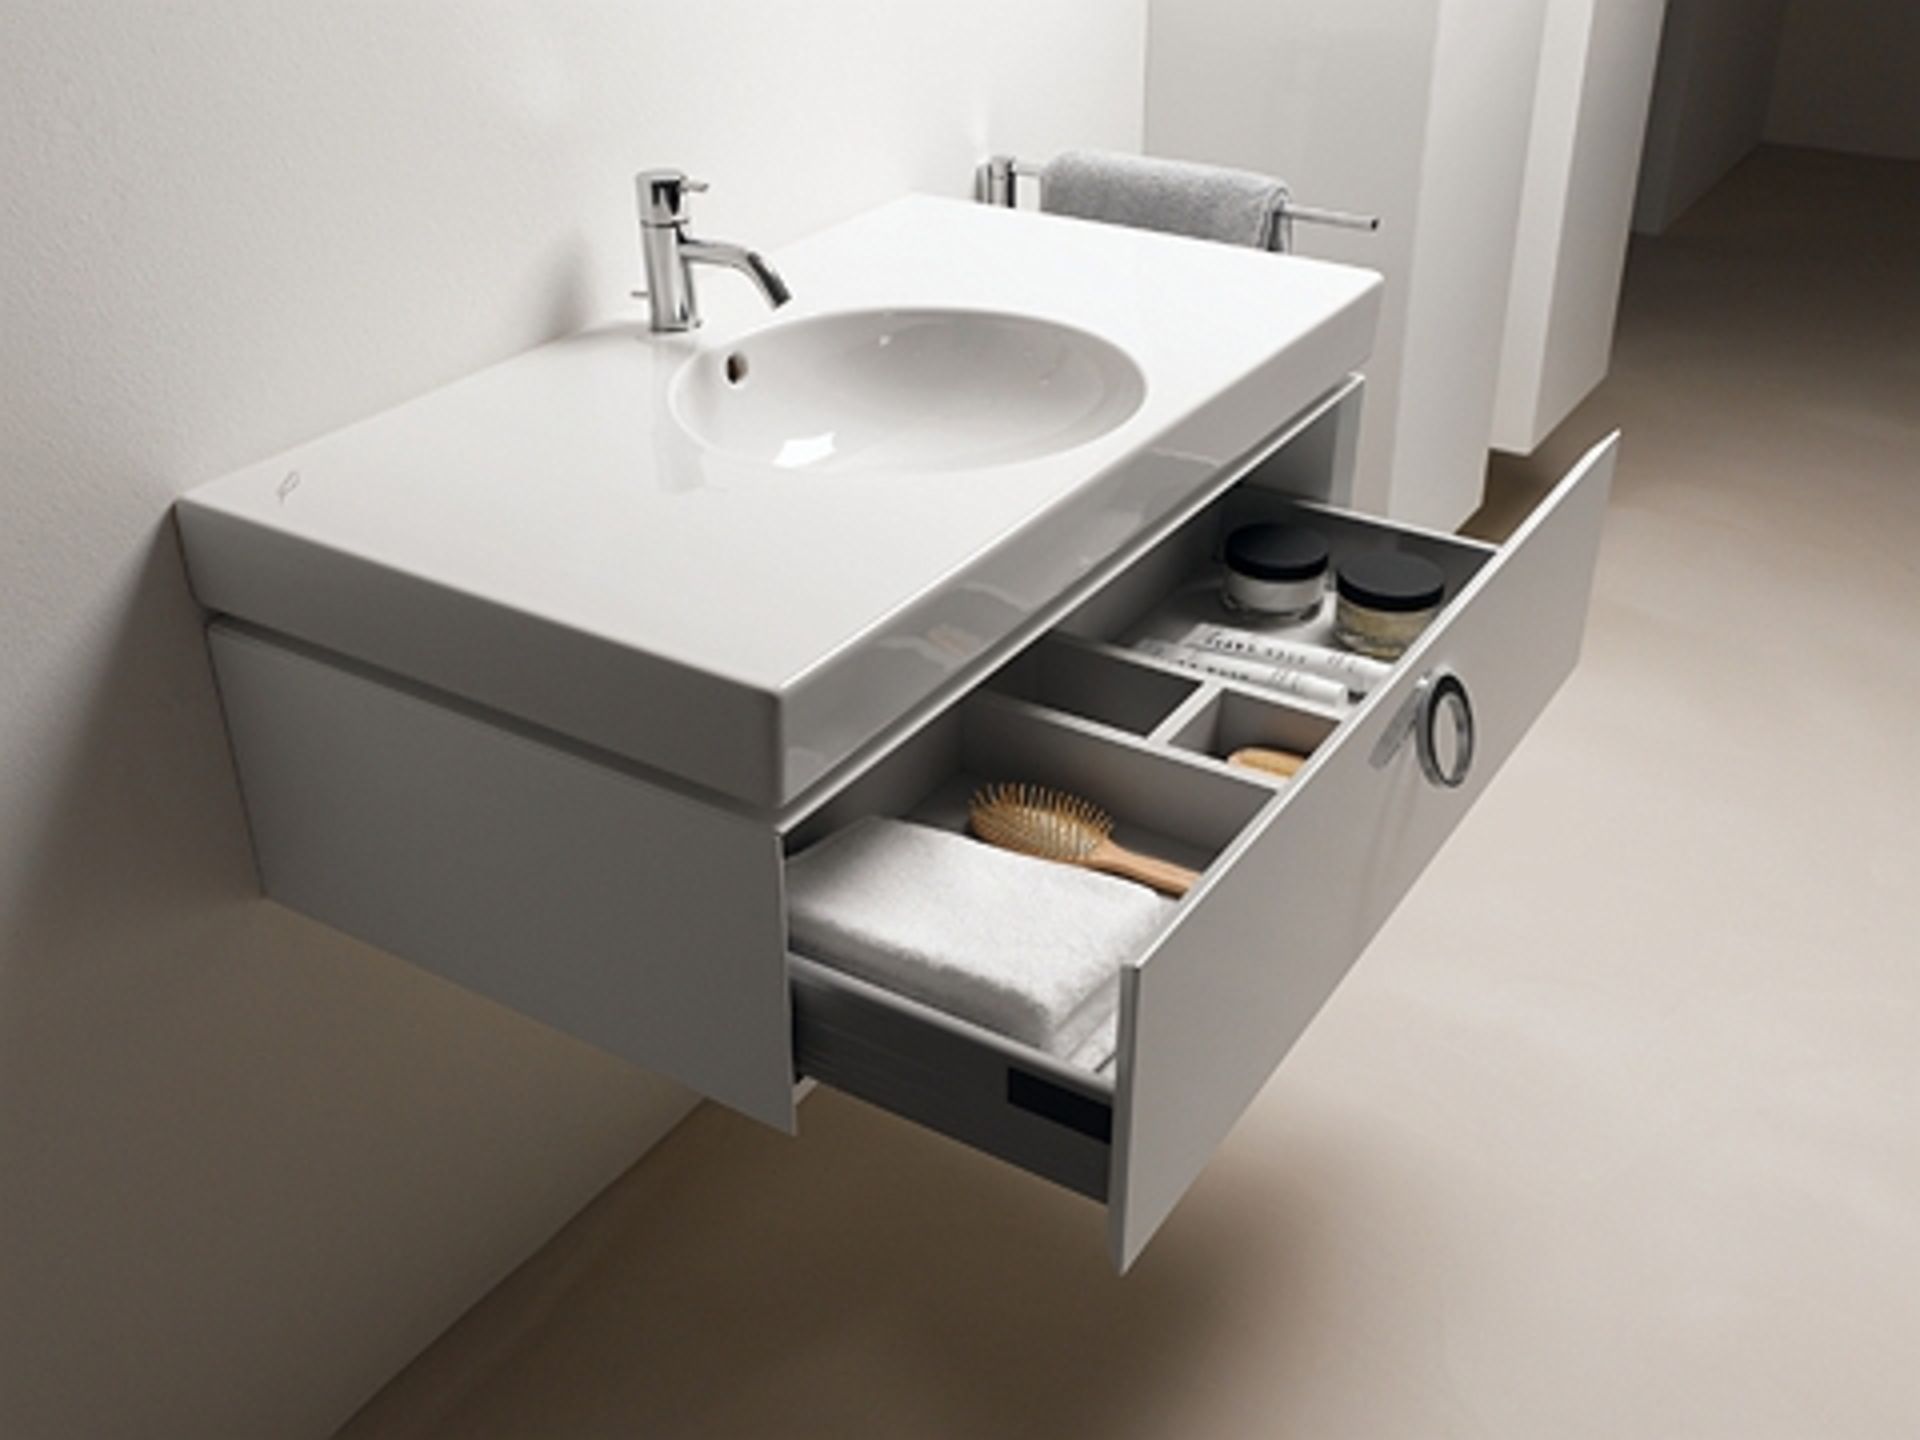 (XL90) Keramag Preciosa II Vanity Unit. RRP £1,020.99. Comes complete with basin. White high g...( - Image 3 of 5